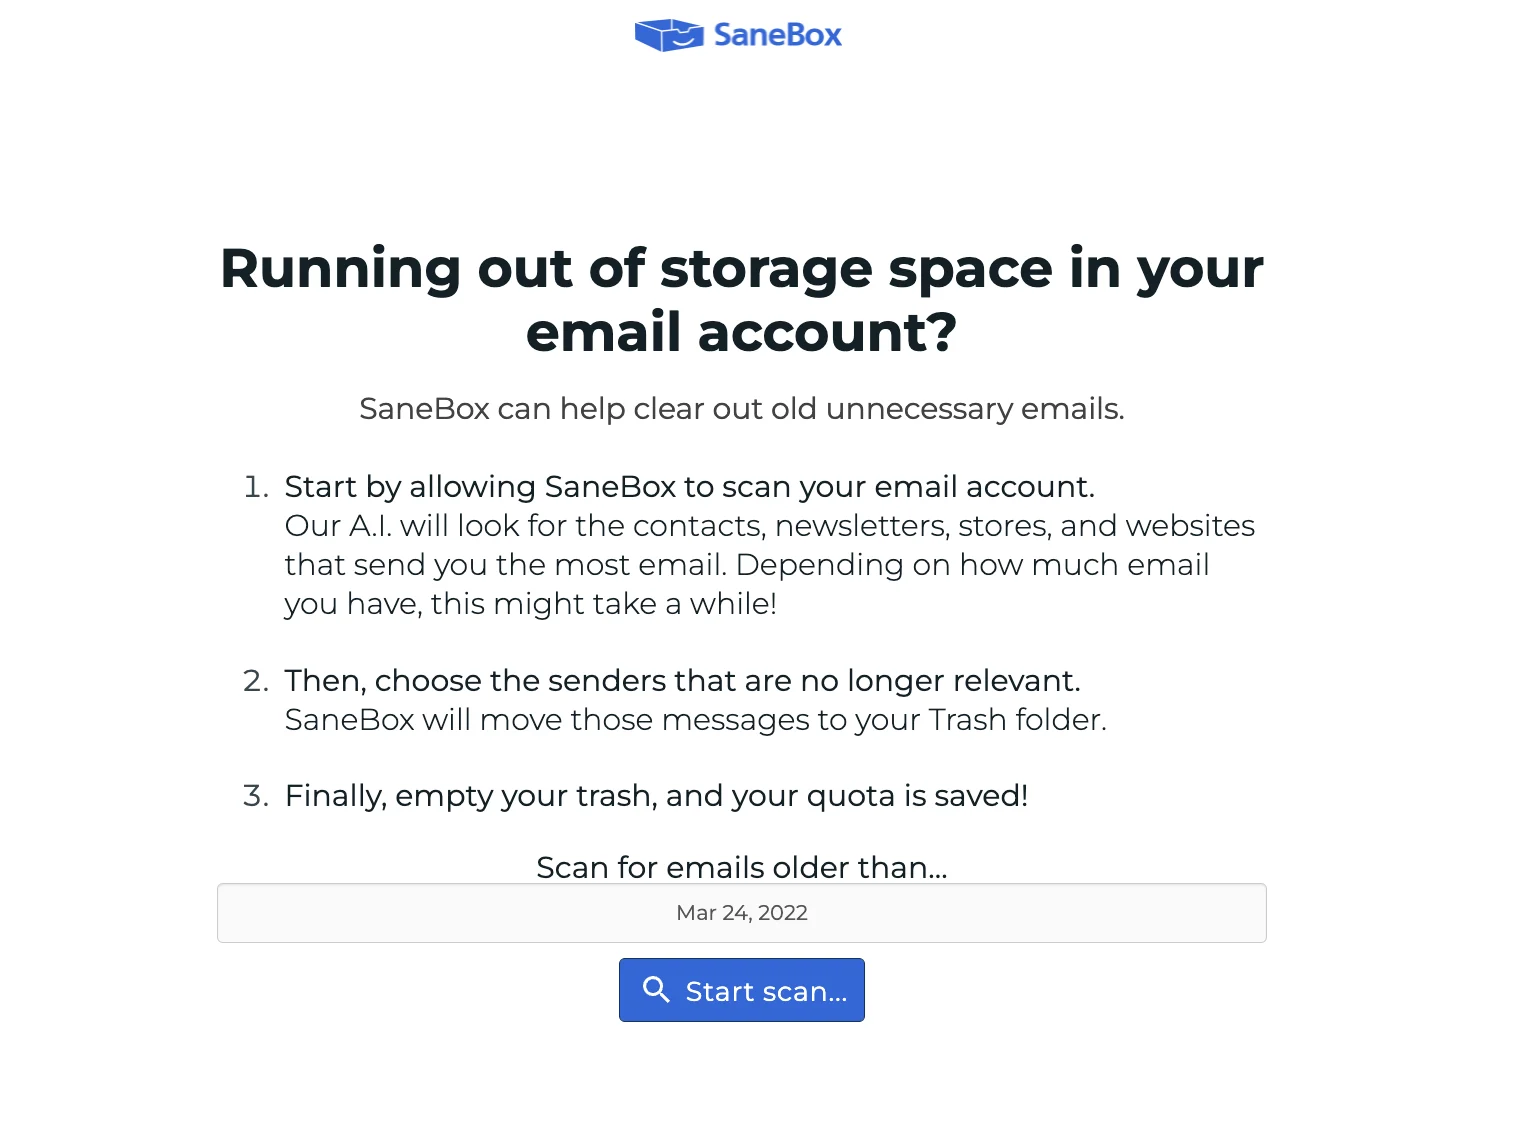 How to Reduce Storage Limits in Gmail, Using SaneBox